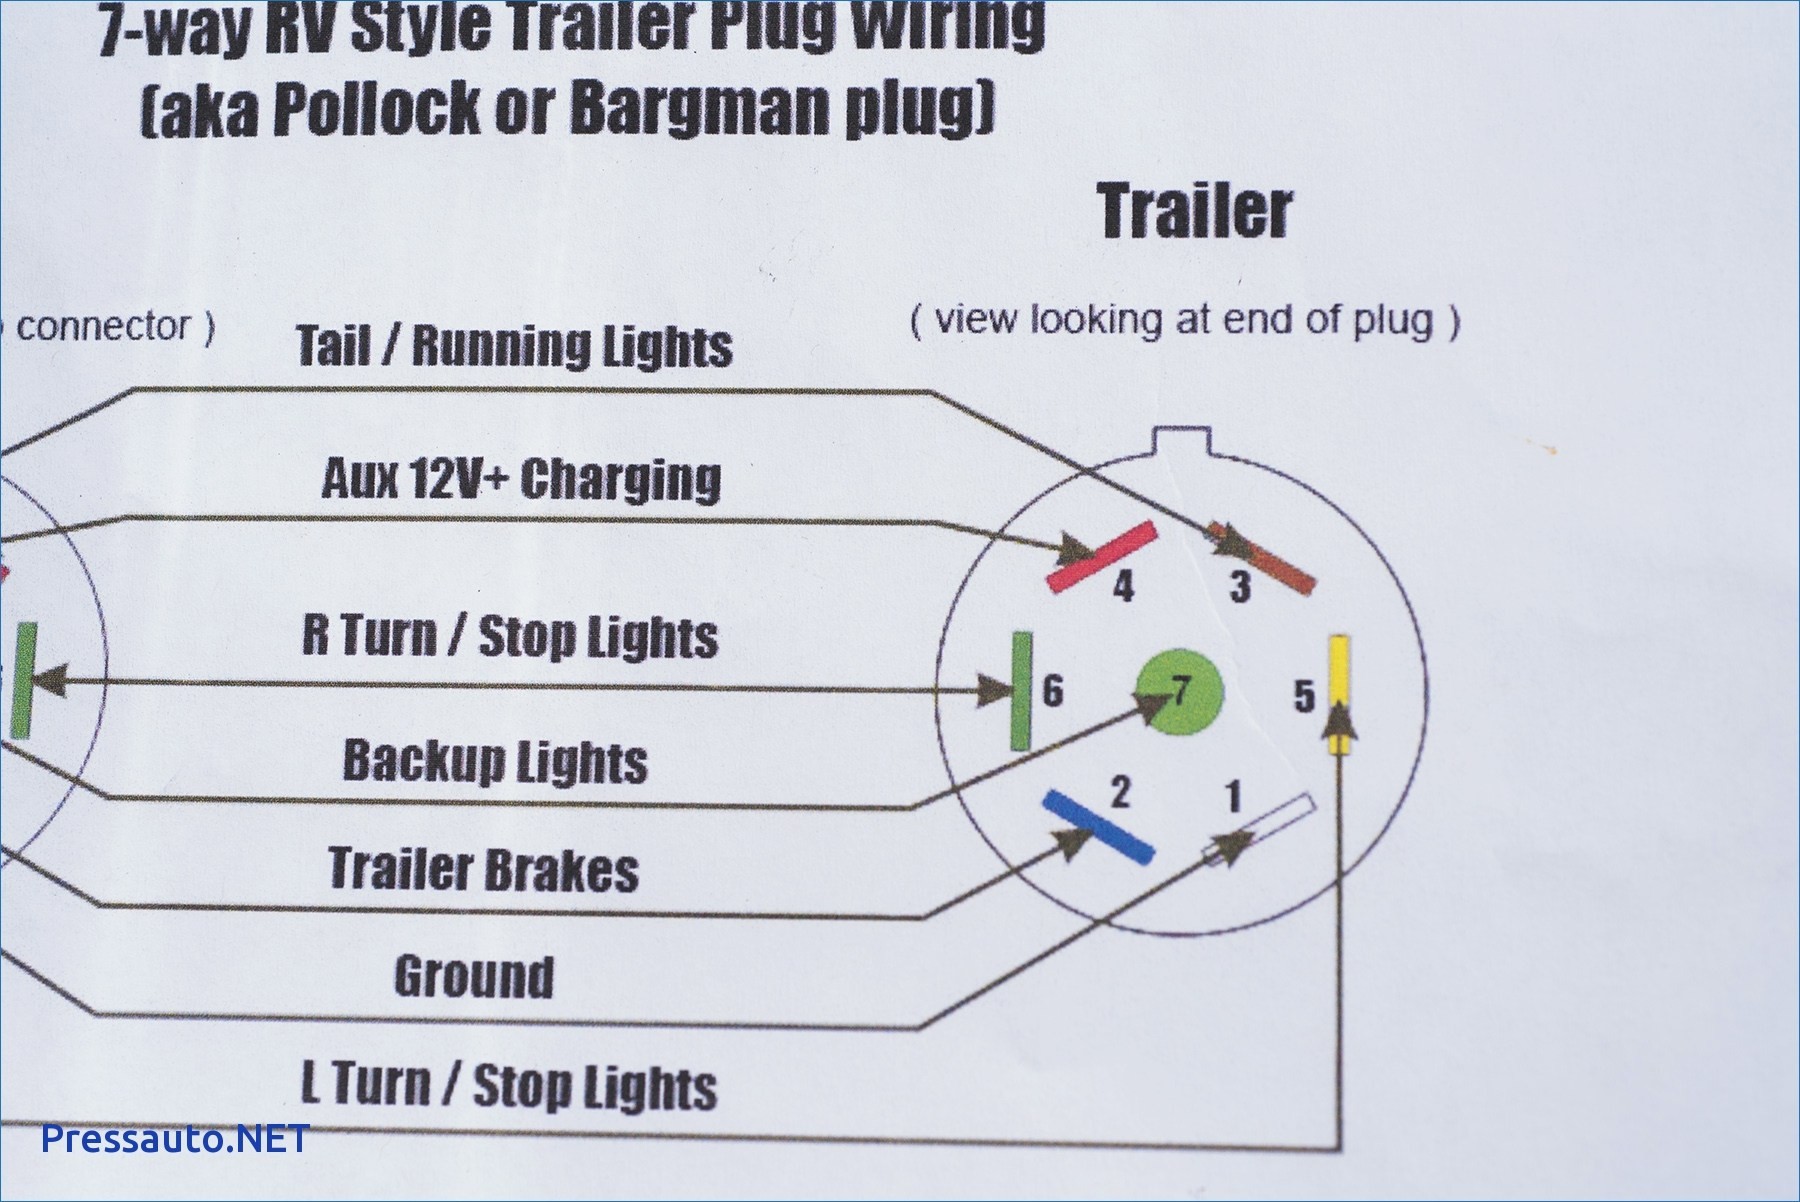 Ford Trailer Wiring Diagram 7 Way Wiring Diagram for Trailer Harness Save 5 Pin Trailer